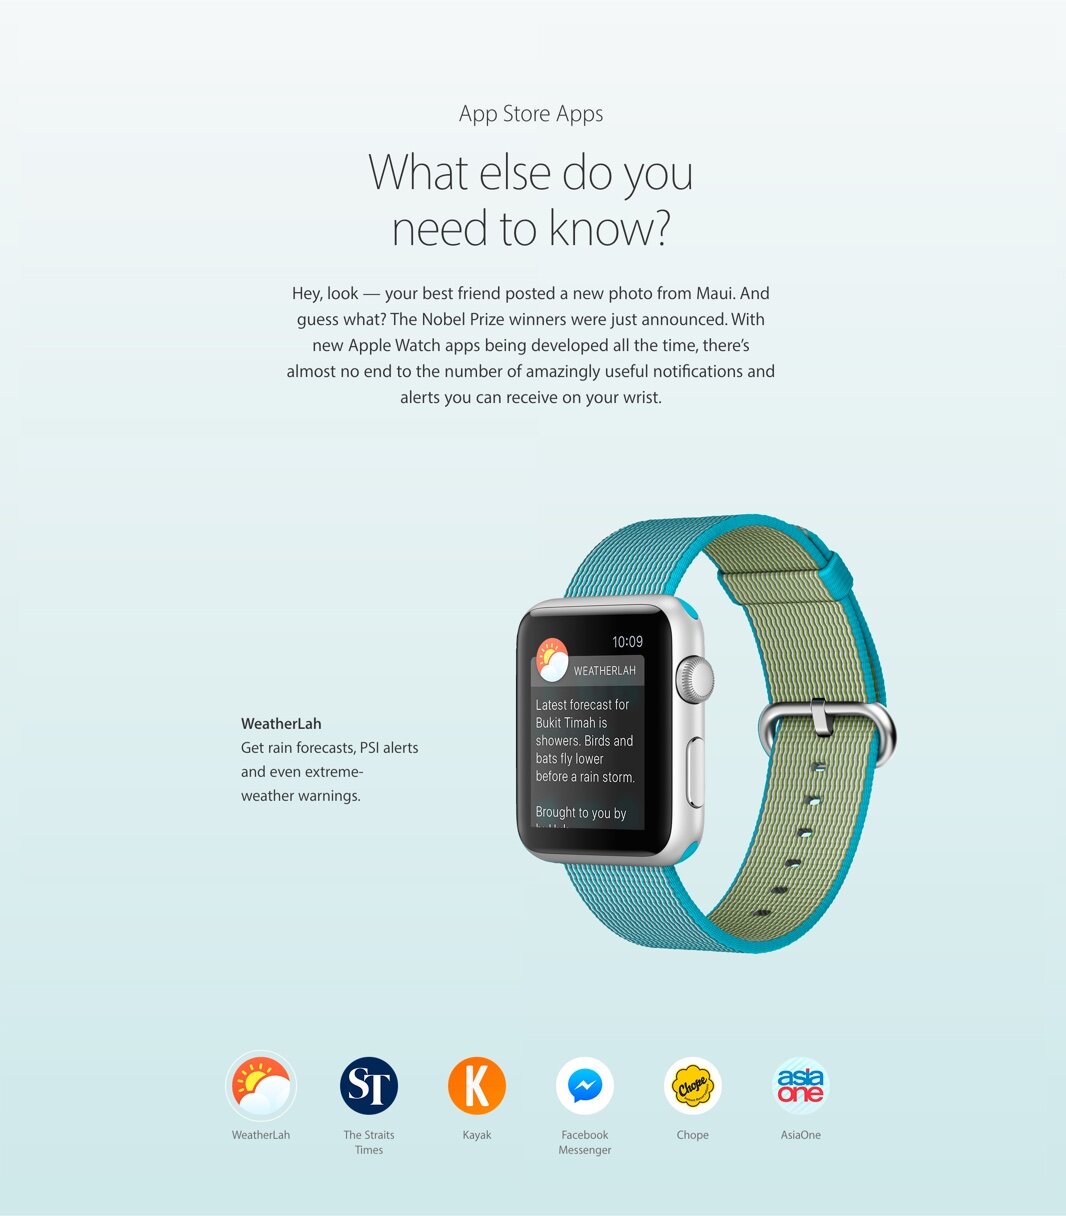 Weatherlah&#x20;Featured&#x20;on&#x20;the&#x20;Apple&#x20;Watch&#x20;Page